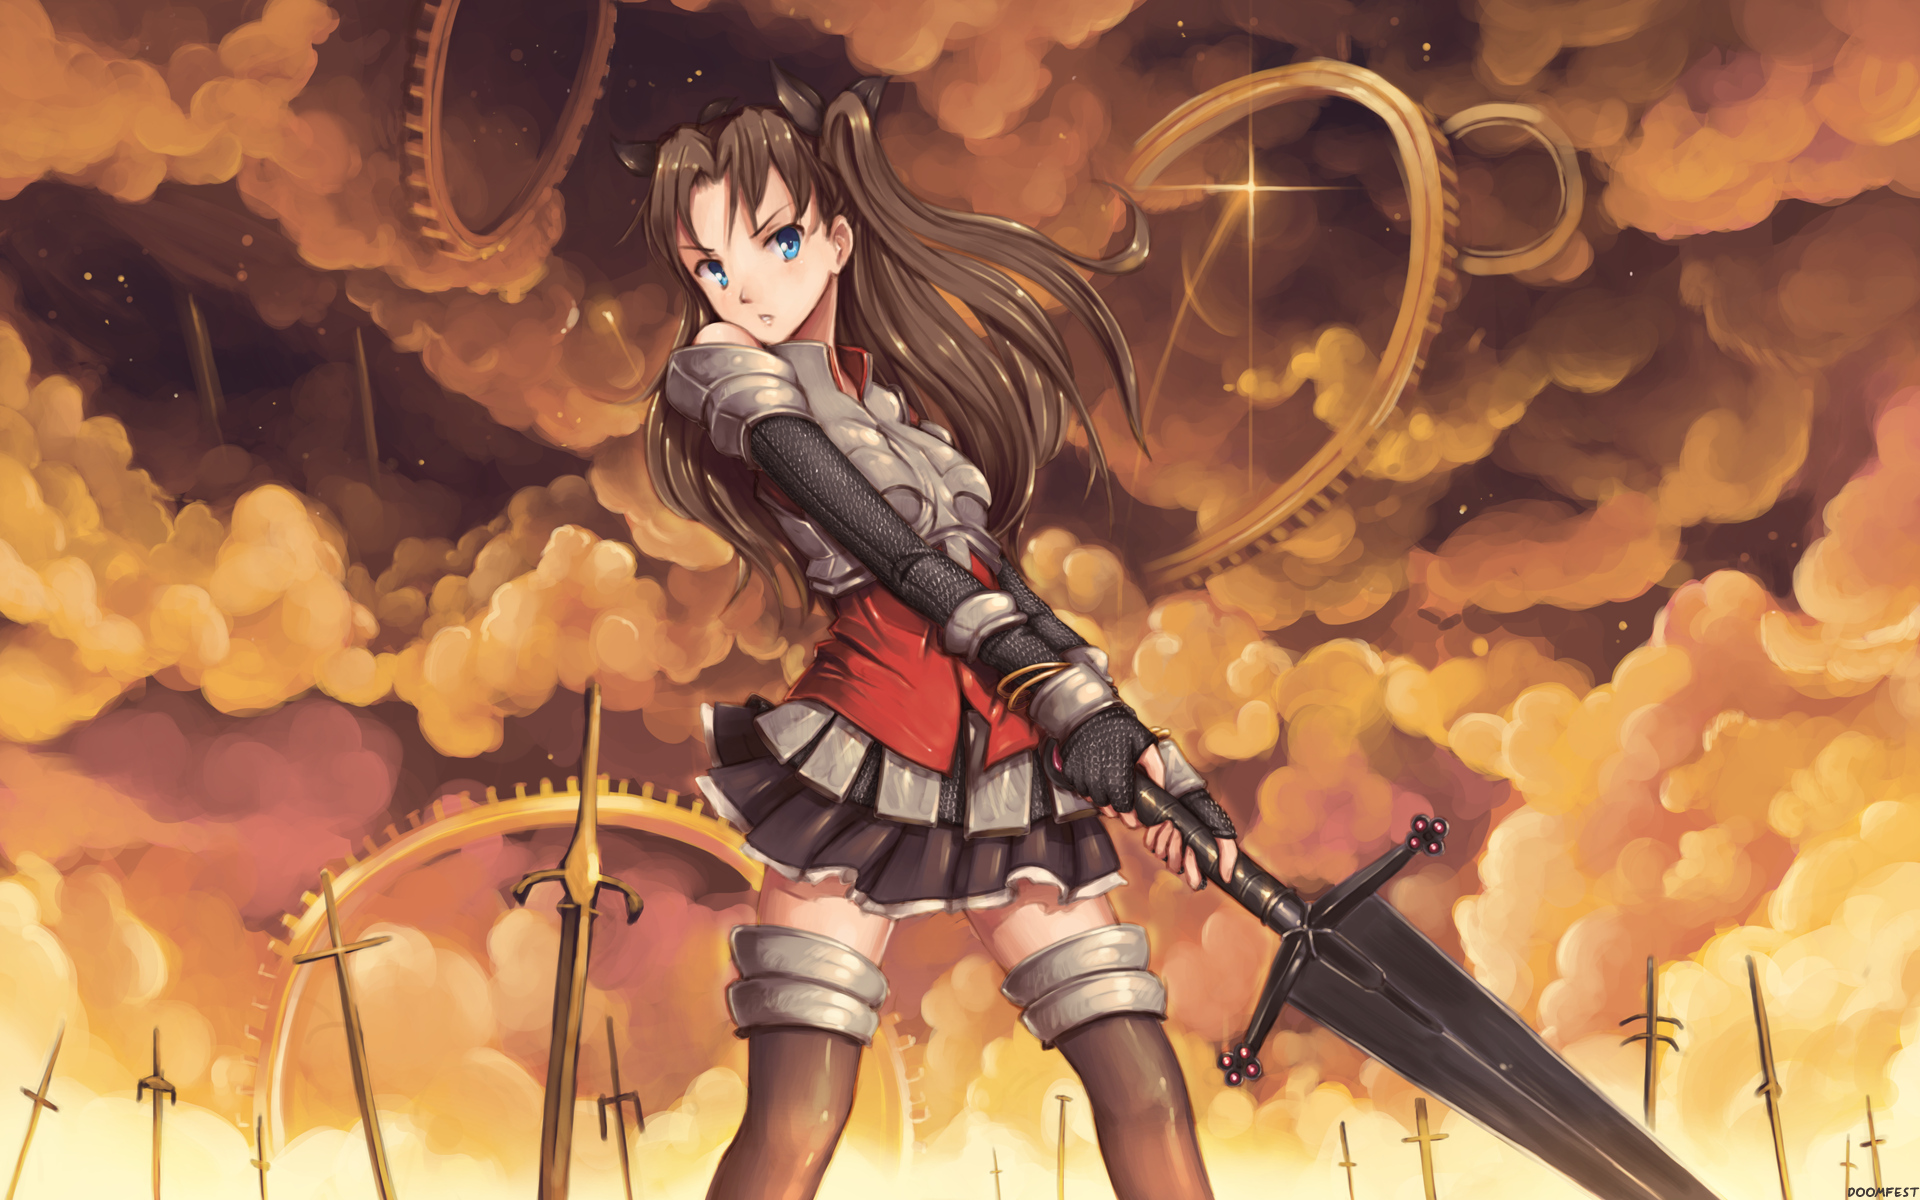 Rin Tohsaka from Fate/Stay Night in armor with sword and blue eyes.